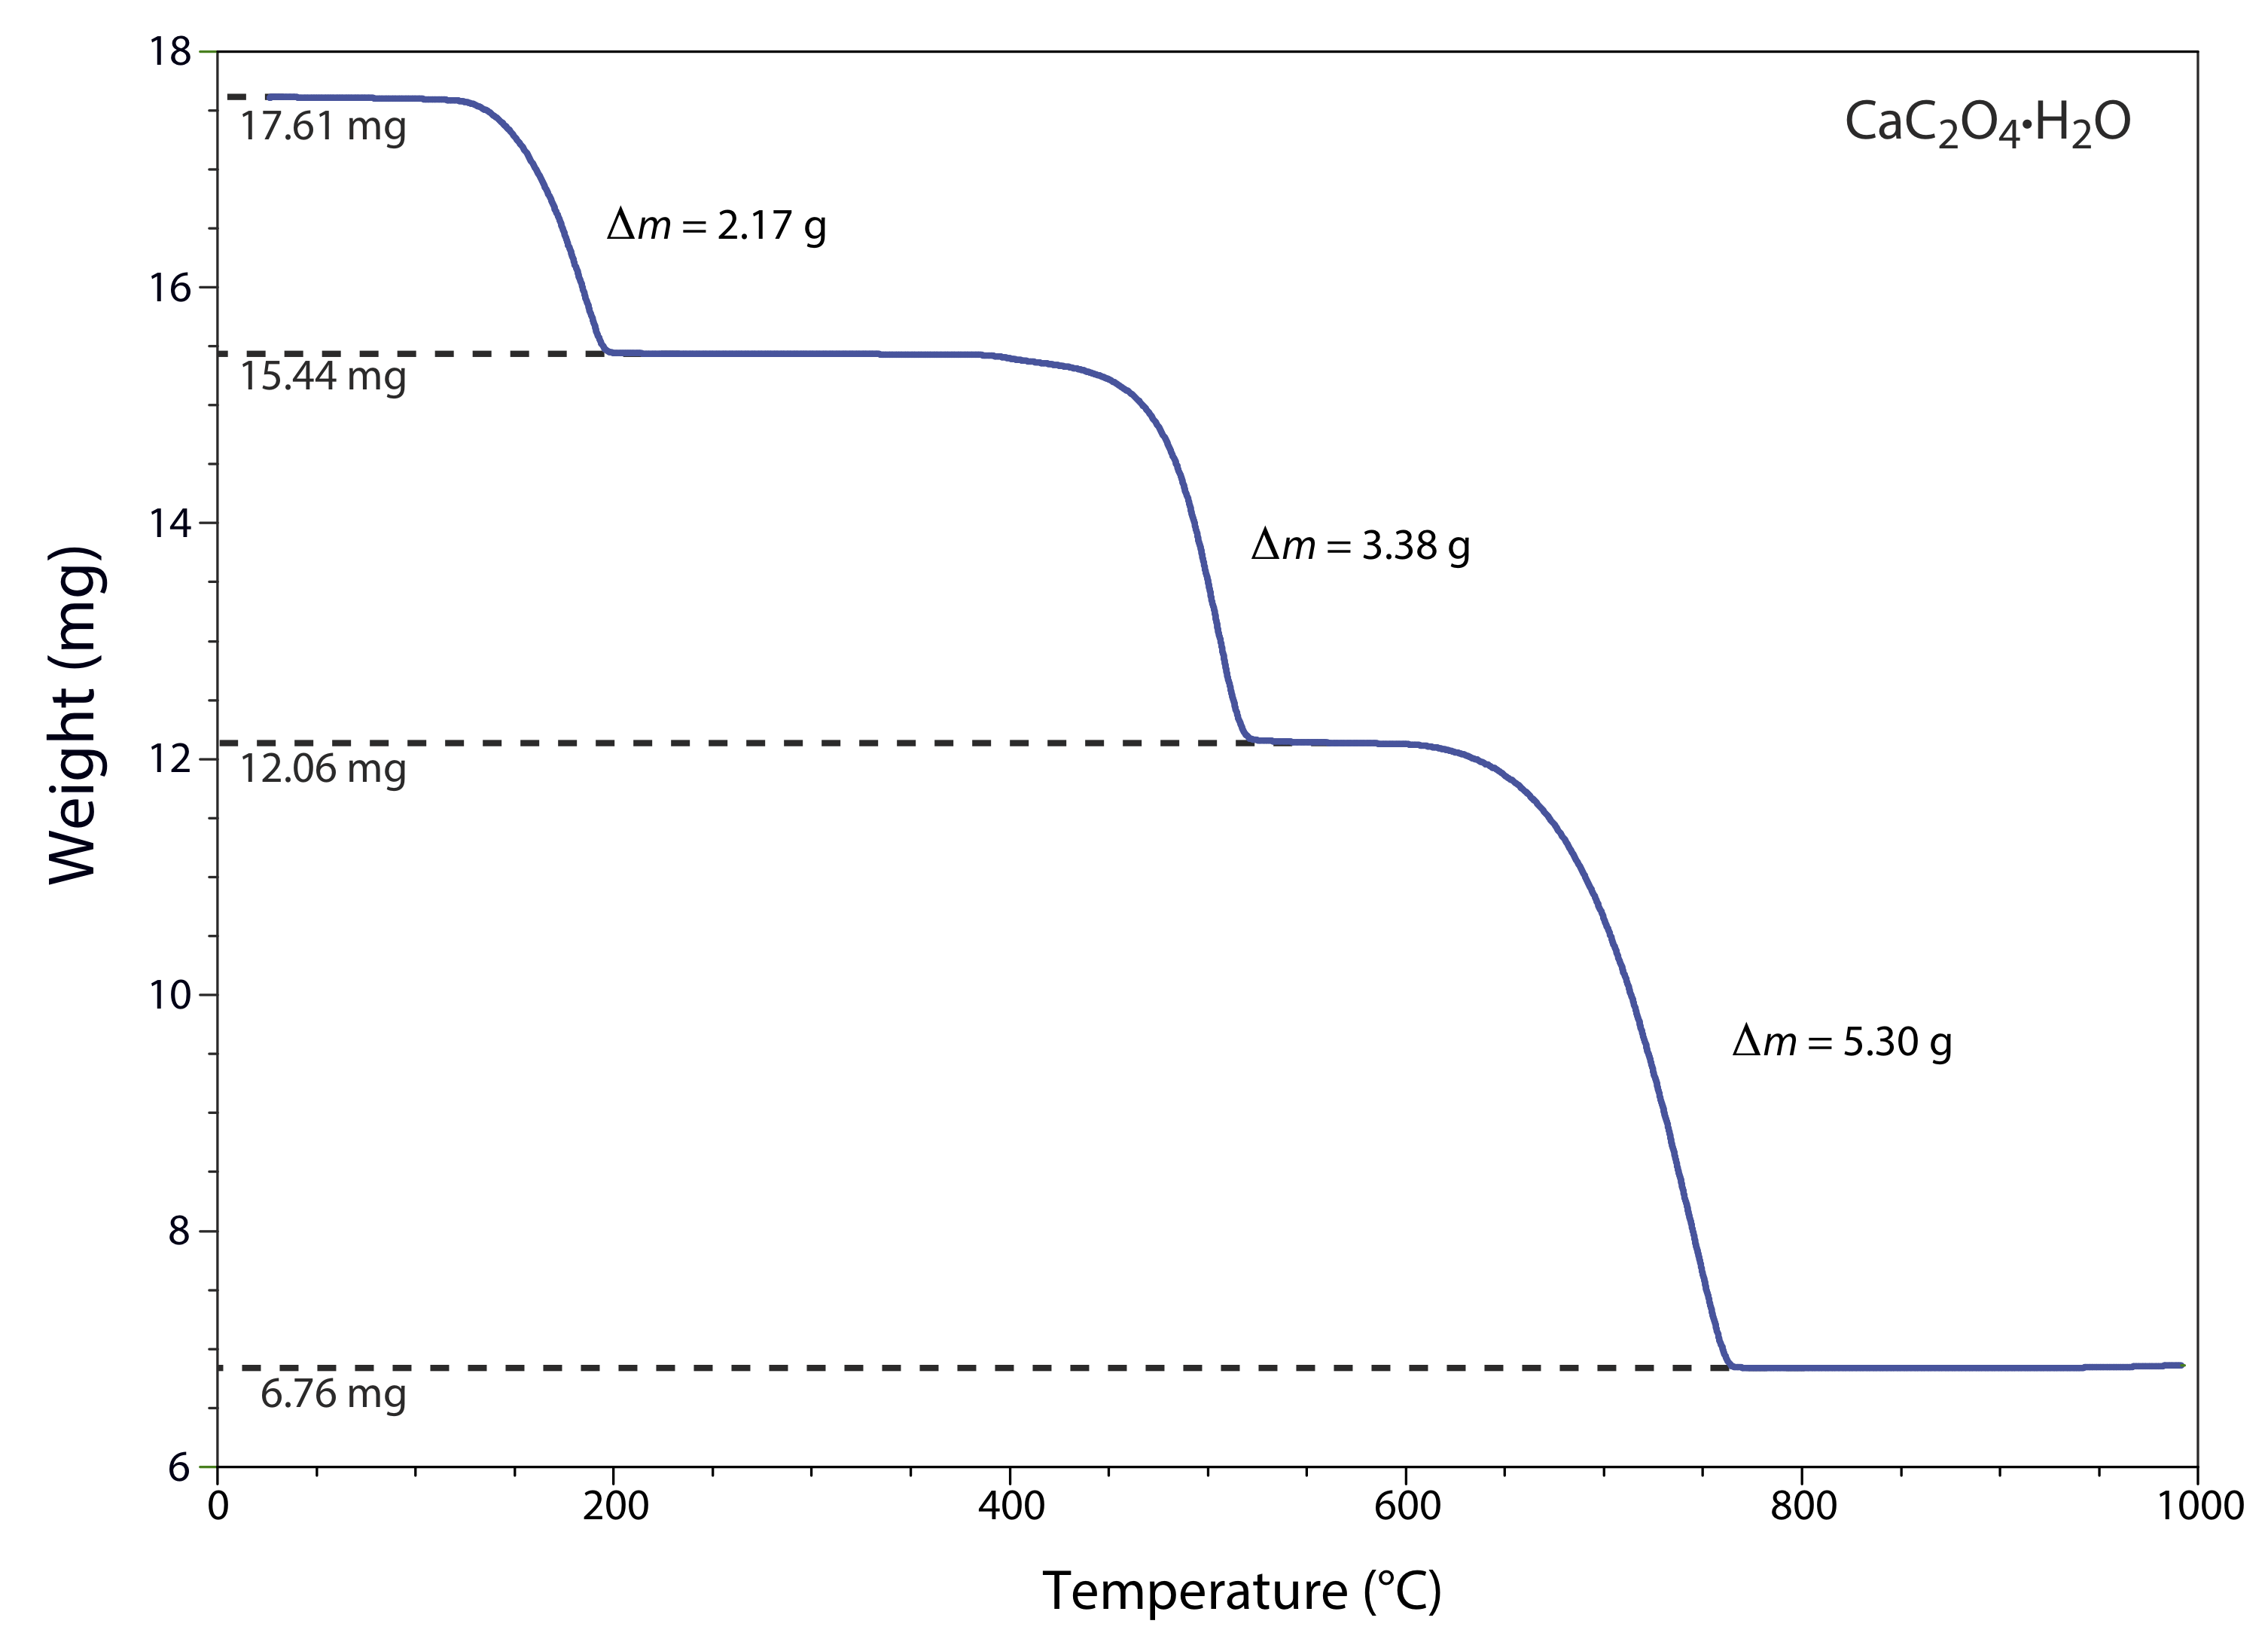 After increasing the temperature to 200 Celsius, the sample lost 2.17mg. AT 550 Celsius, another drop of 3.38mg occurred. Finally, at 750 Celsius, a drop of 5.3mg occurred.